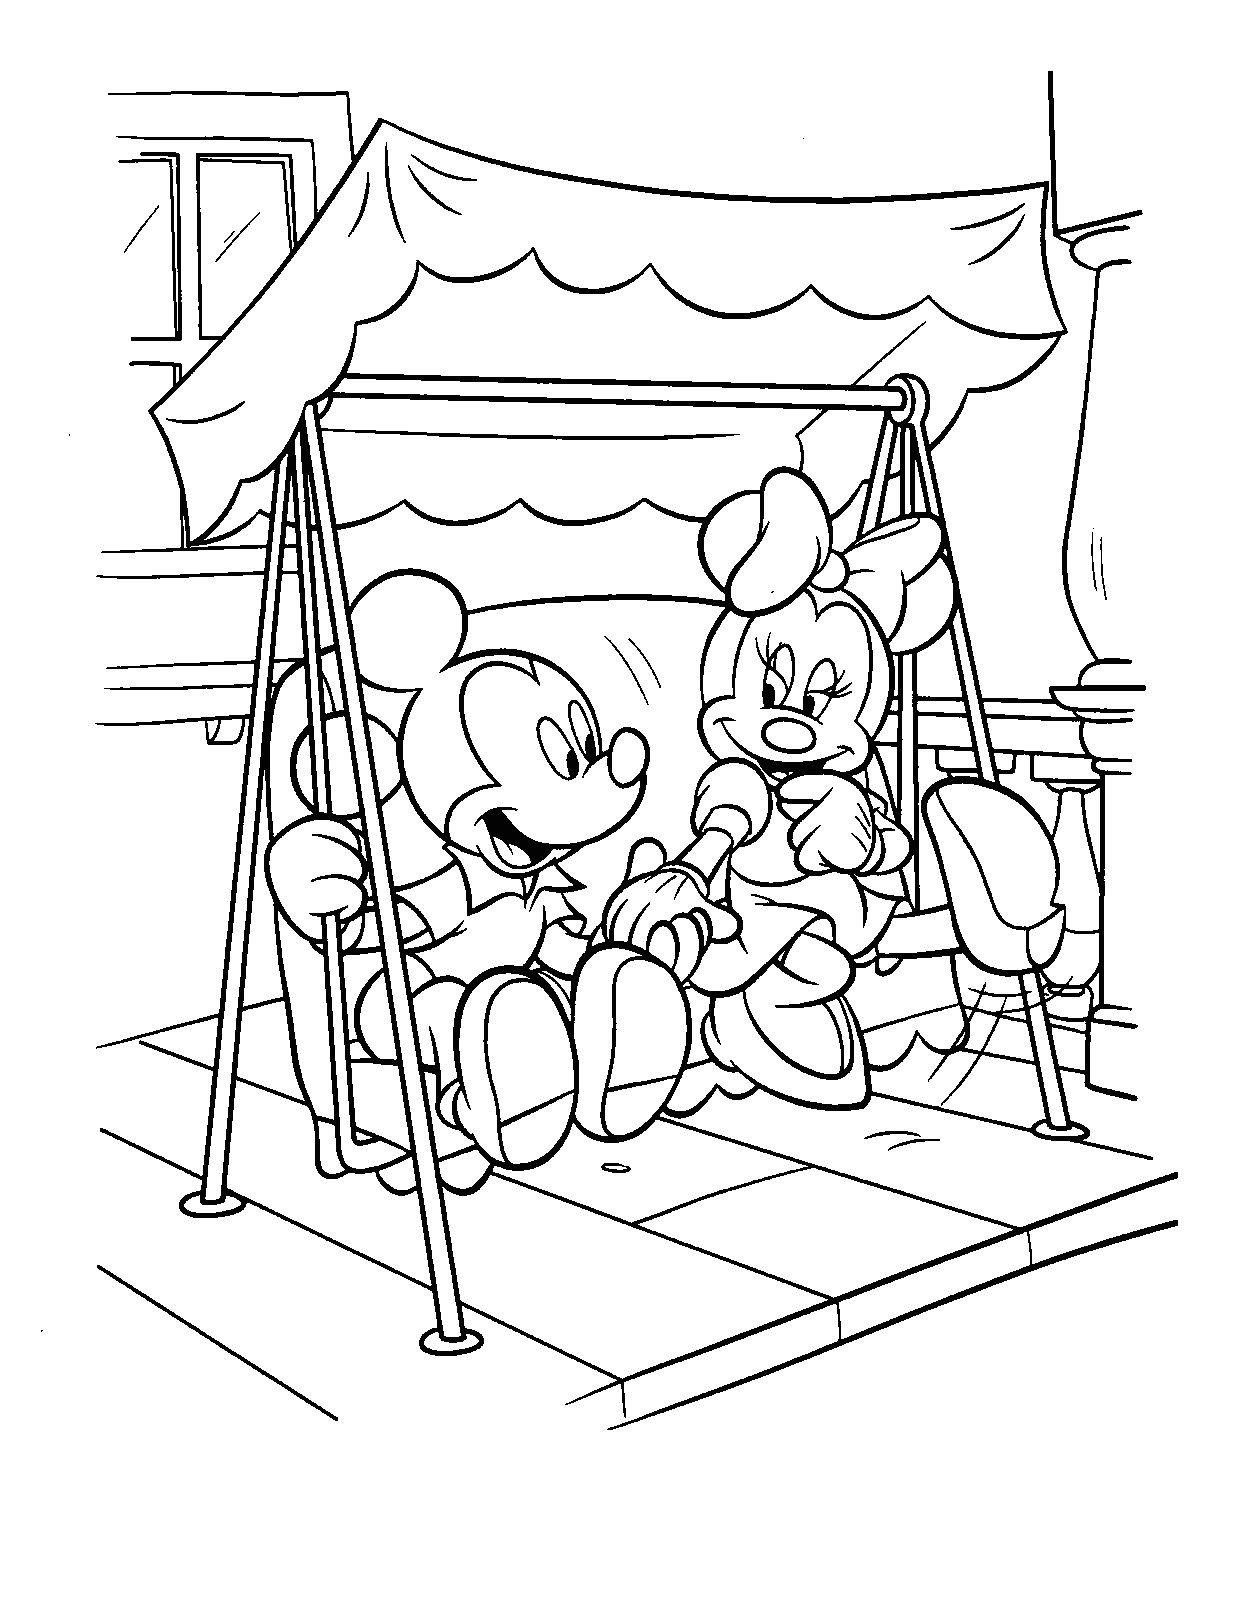 Coloring Page of Mickey and Minnie Mouse